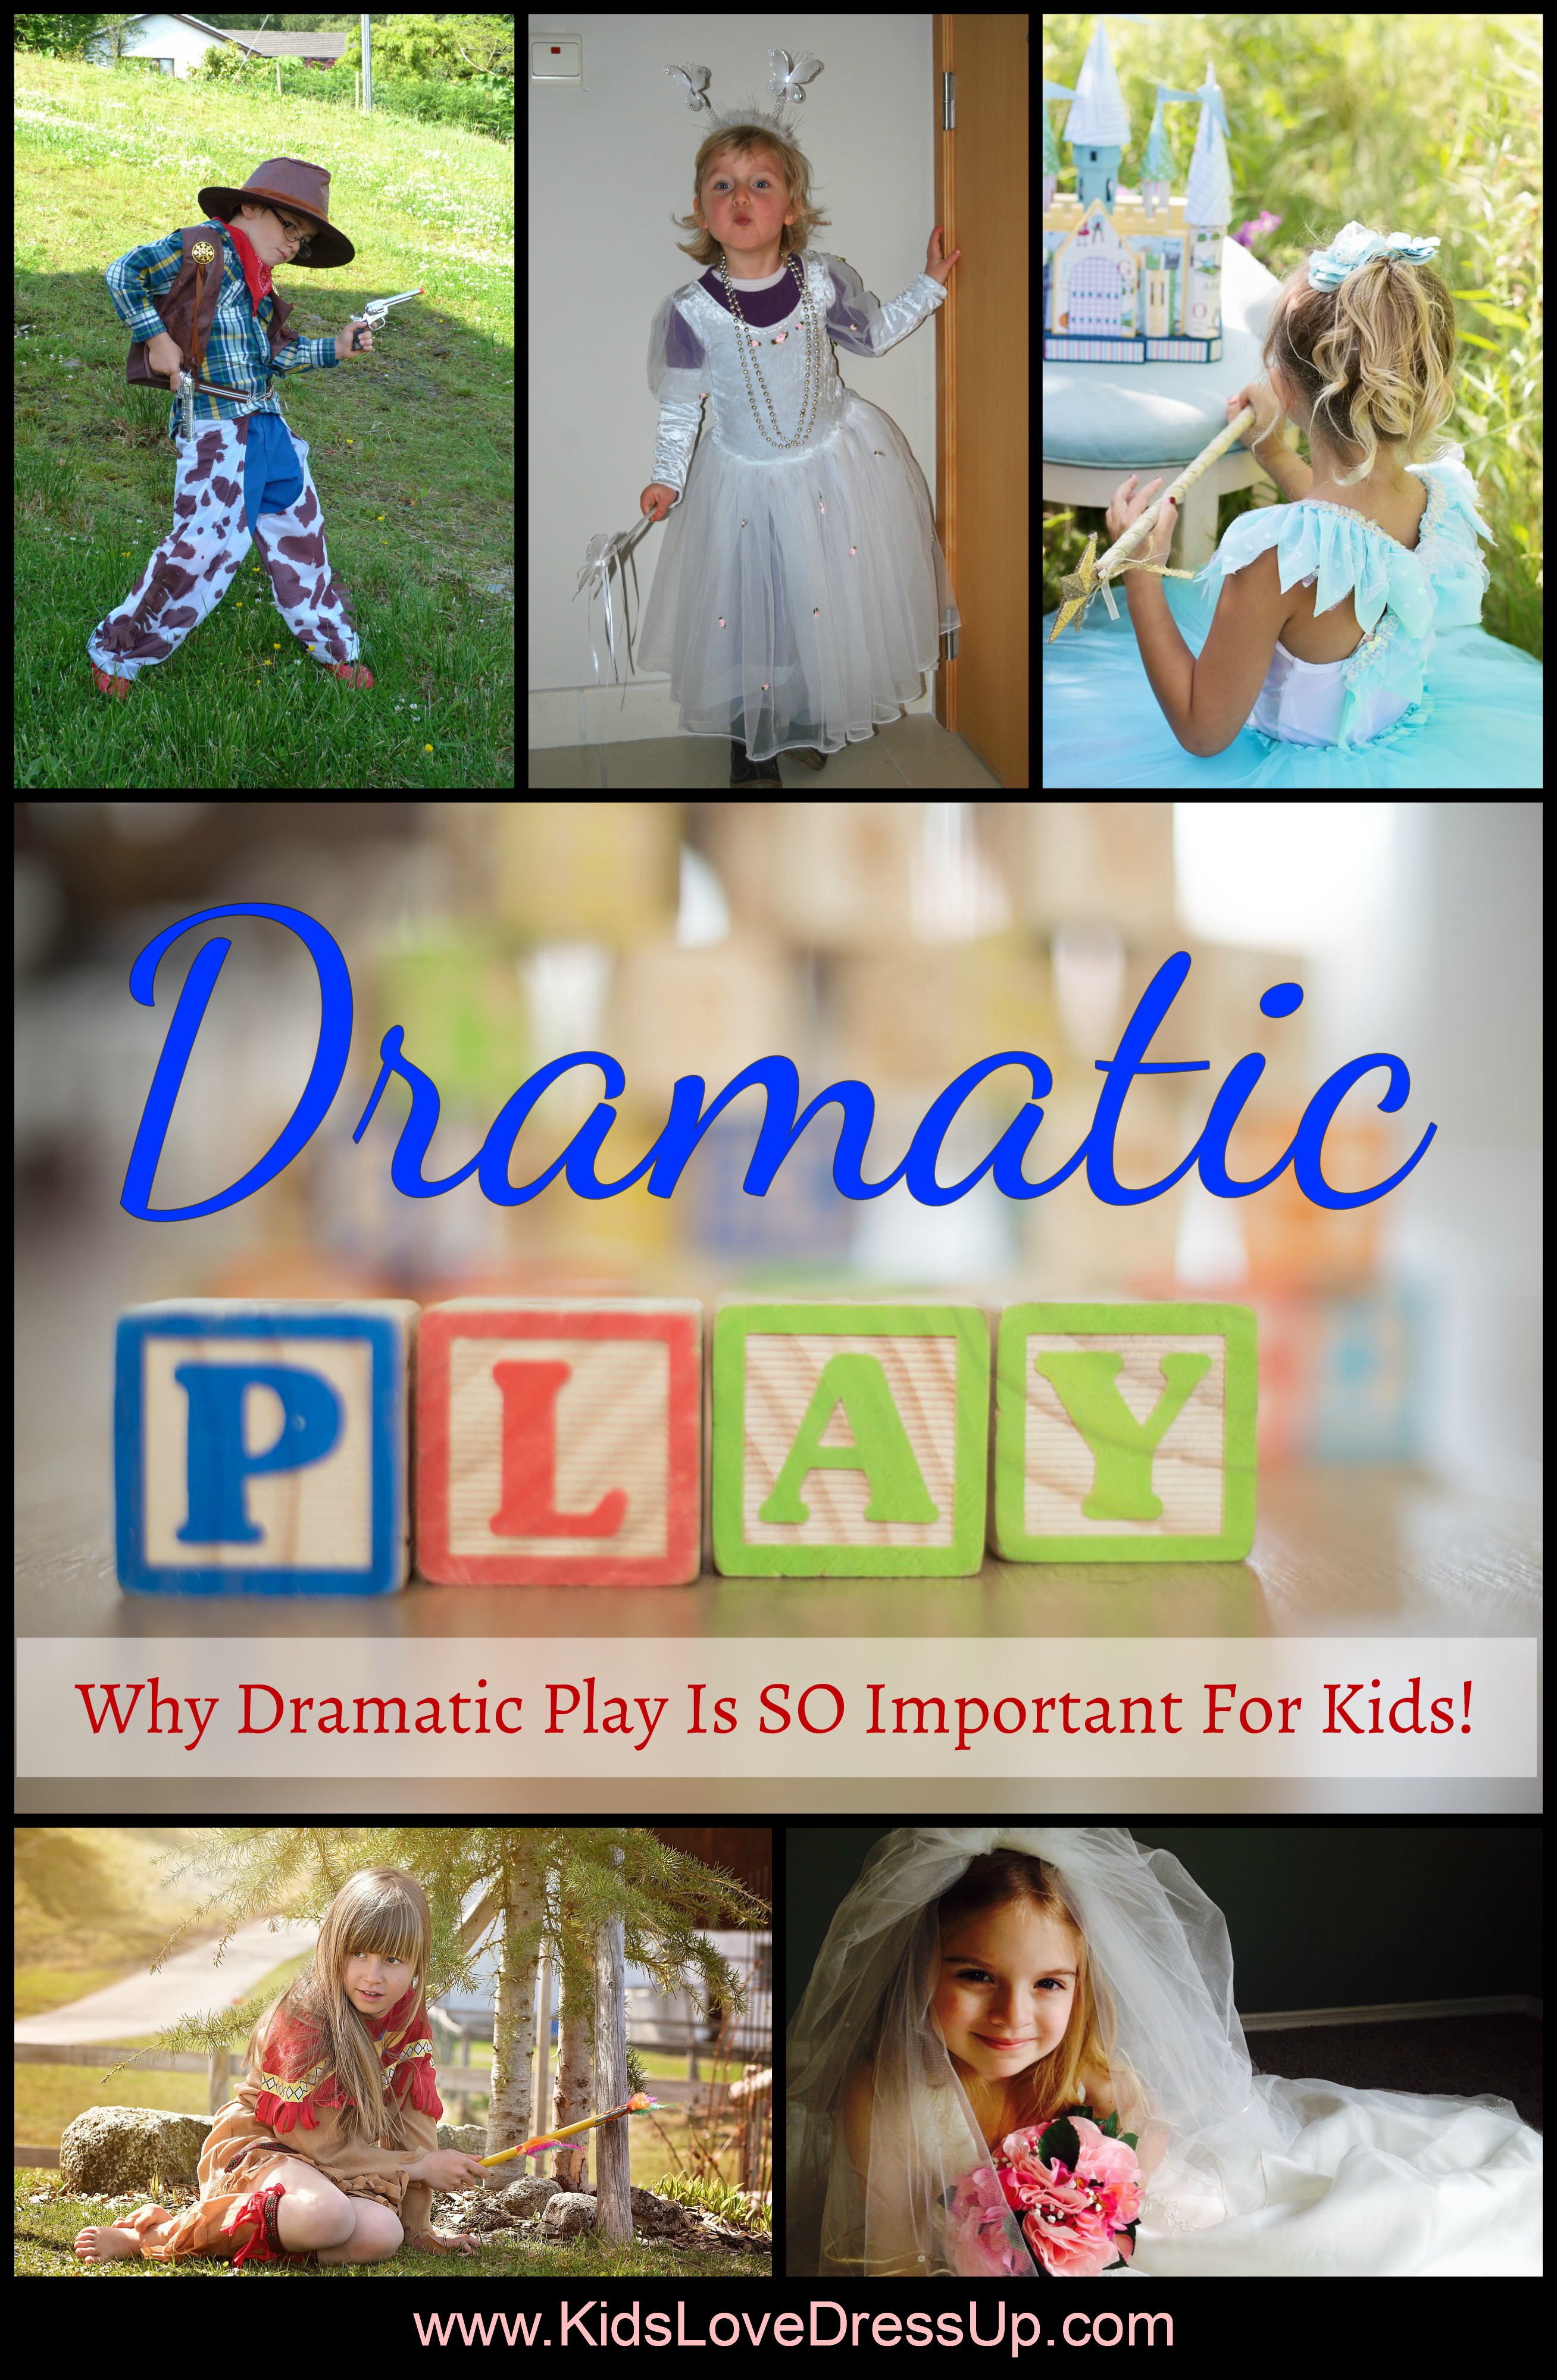 Why dramatic play is important - a look at the great things kids can learn while playing dress up, make believe, and more! Check out this article at www.kidslovedressup.com today!